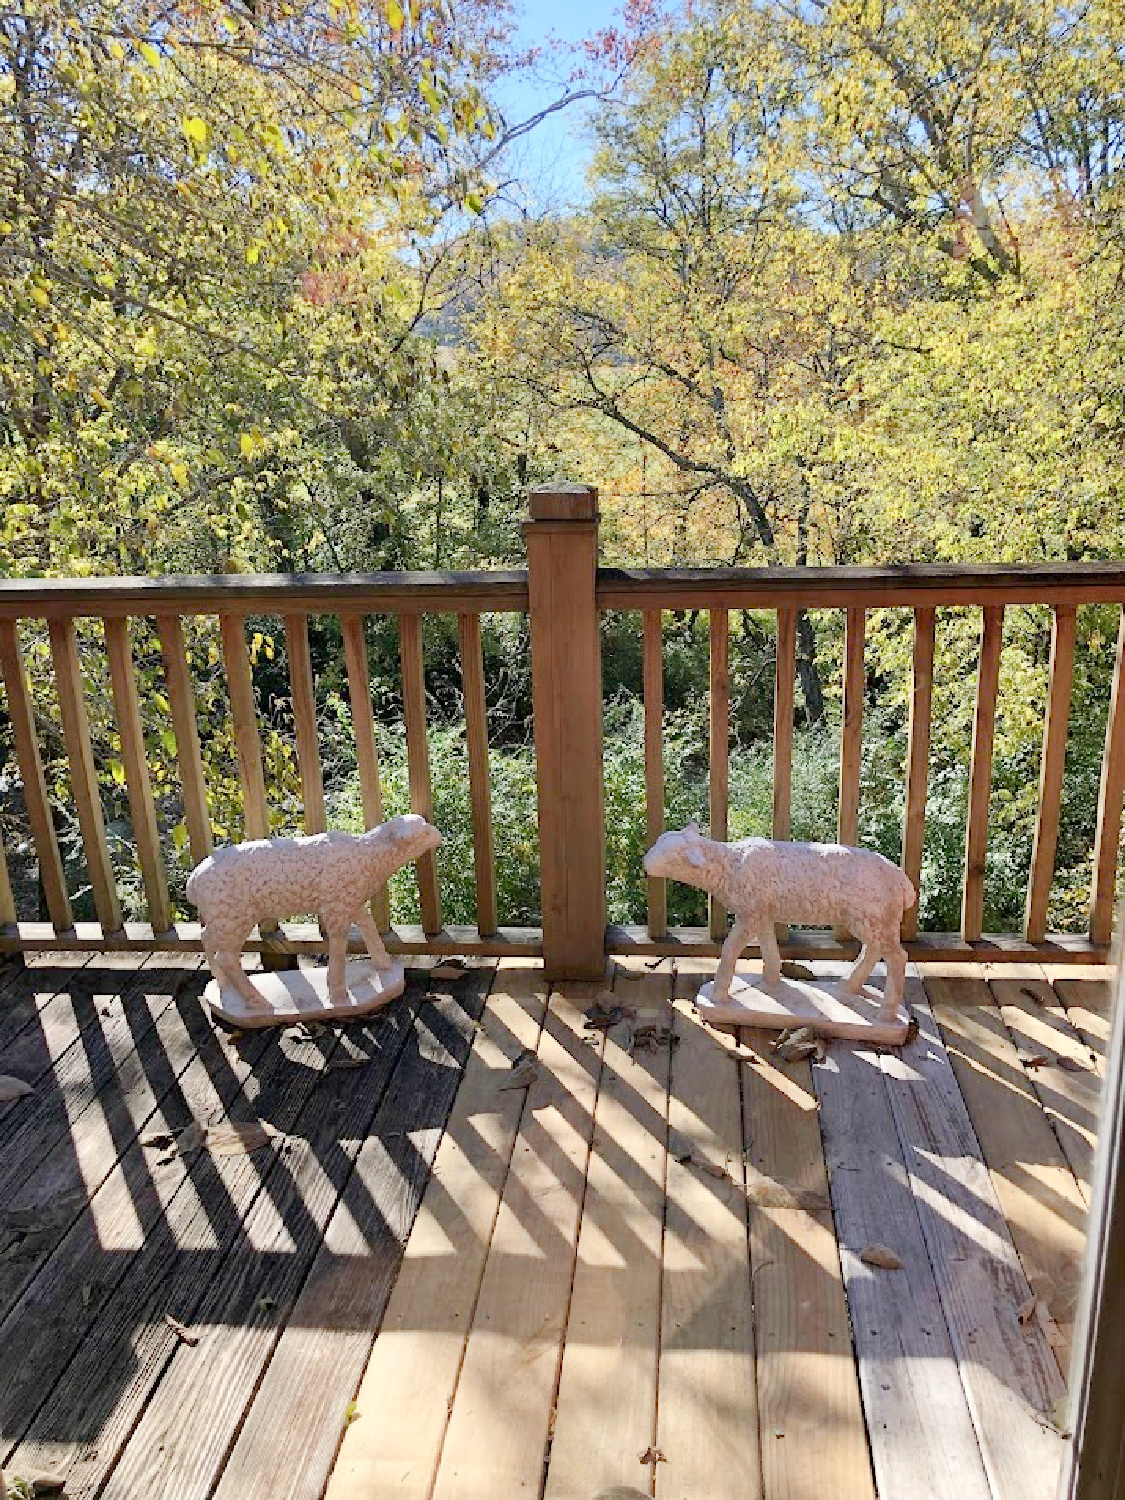 Standing lamb garden statues on back deck overlooking creek at Patina Home & Garden shop from Giannettis in Leiper's Fork, TN - Hello Lovely Studio. #patinahome #leipersforktn